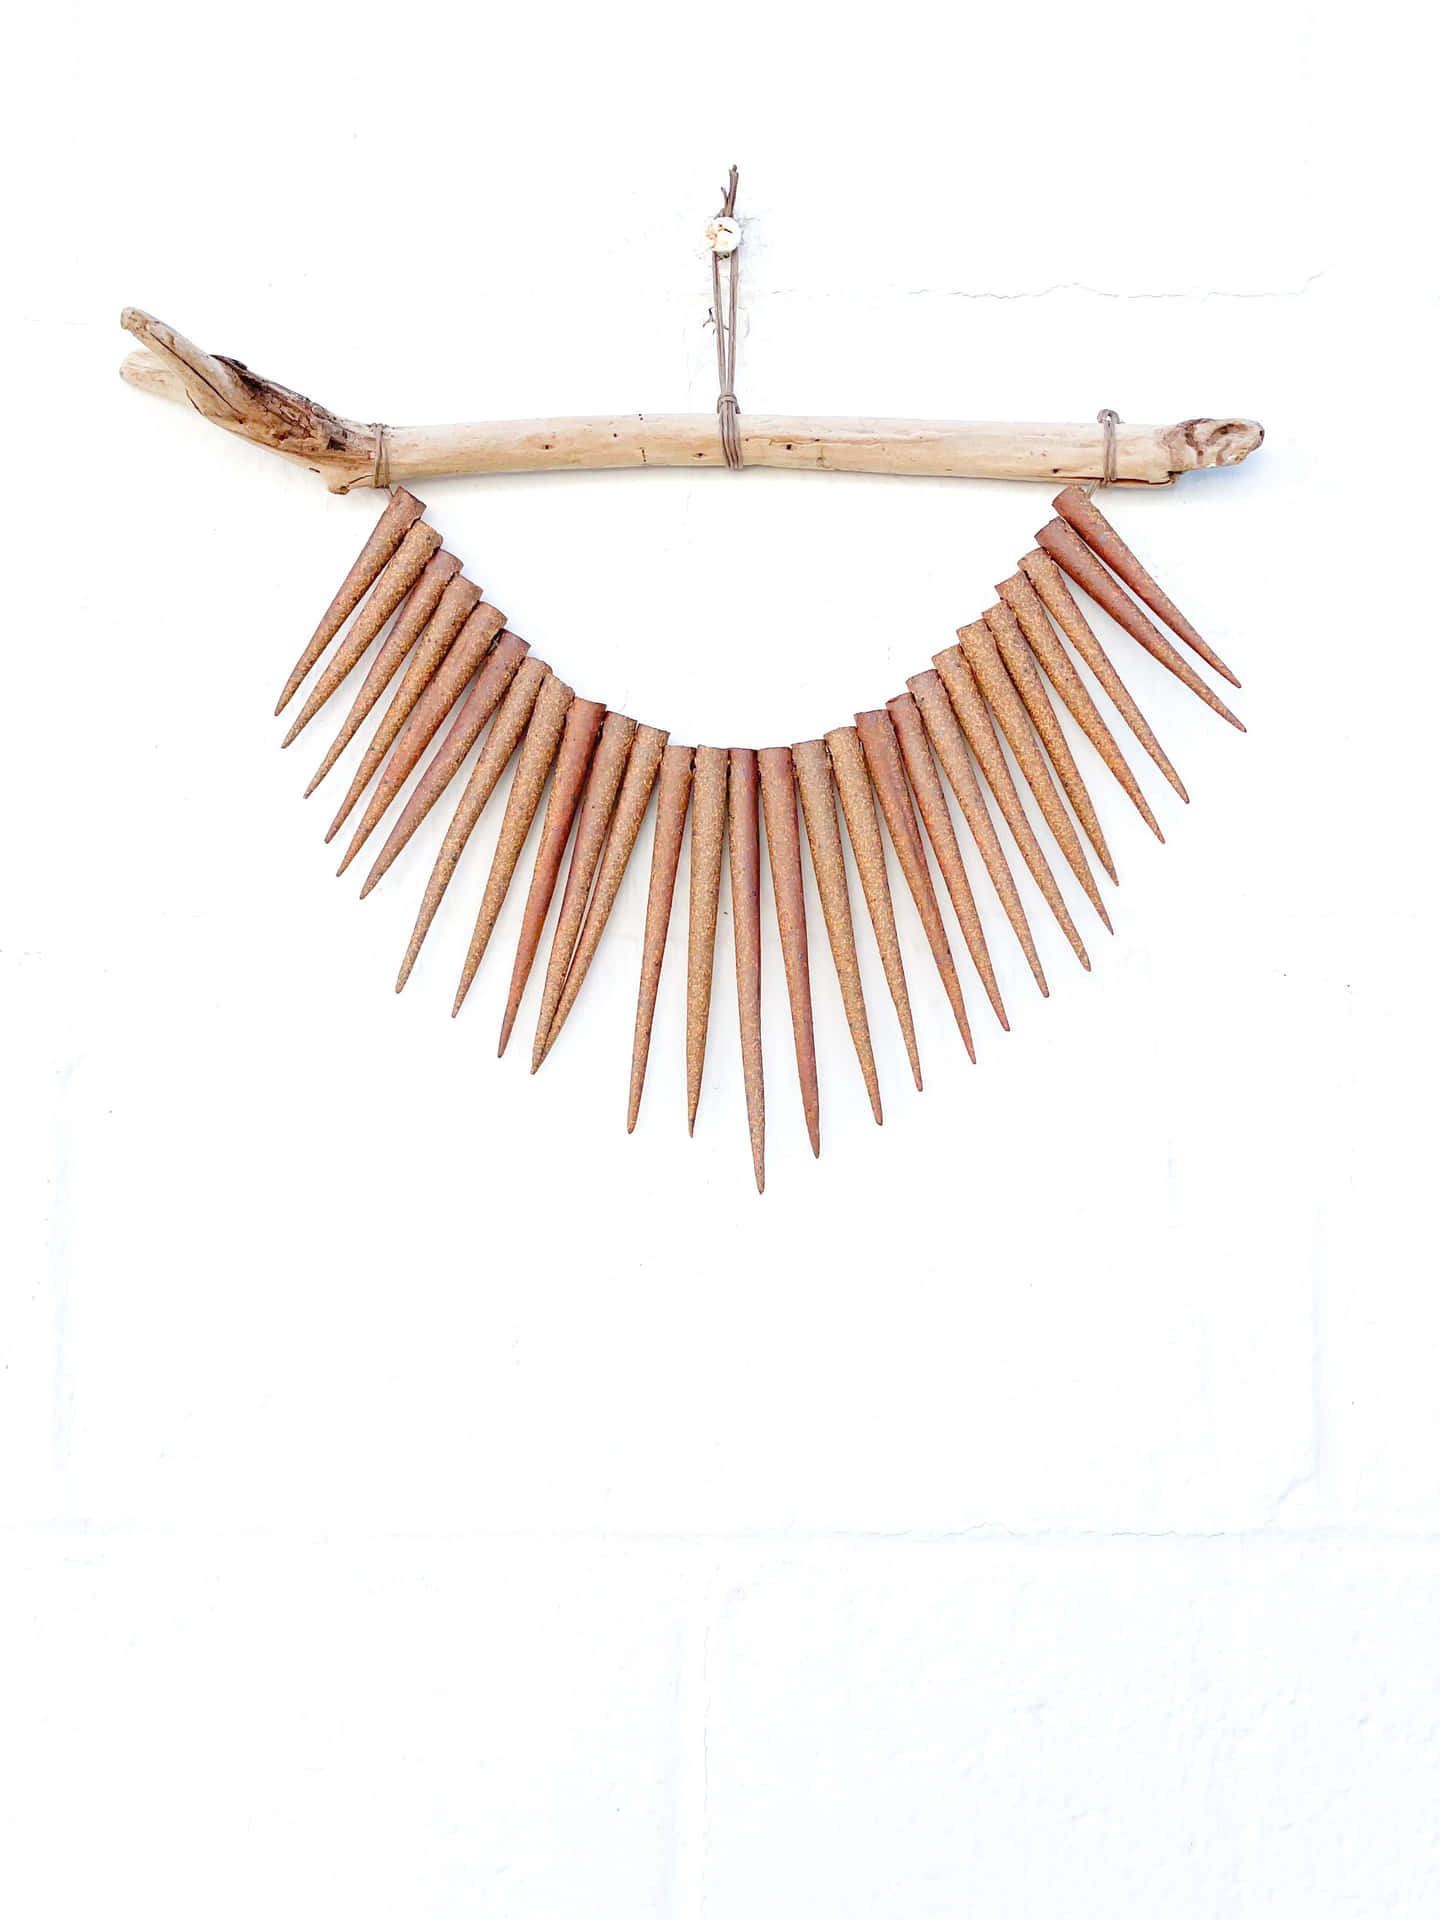 A Wooden Stick With Spikes Hanging From It Wallpaper